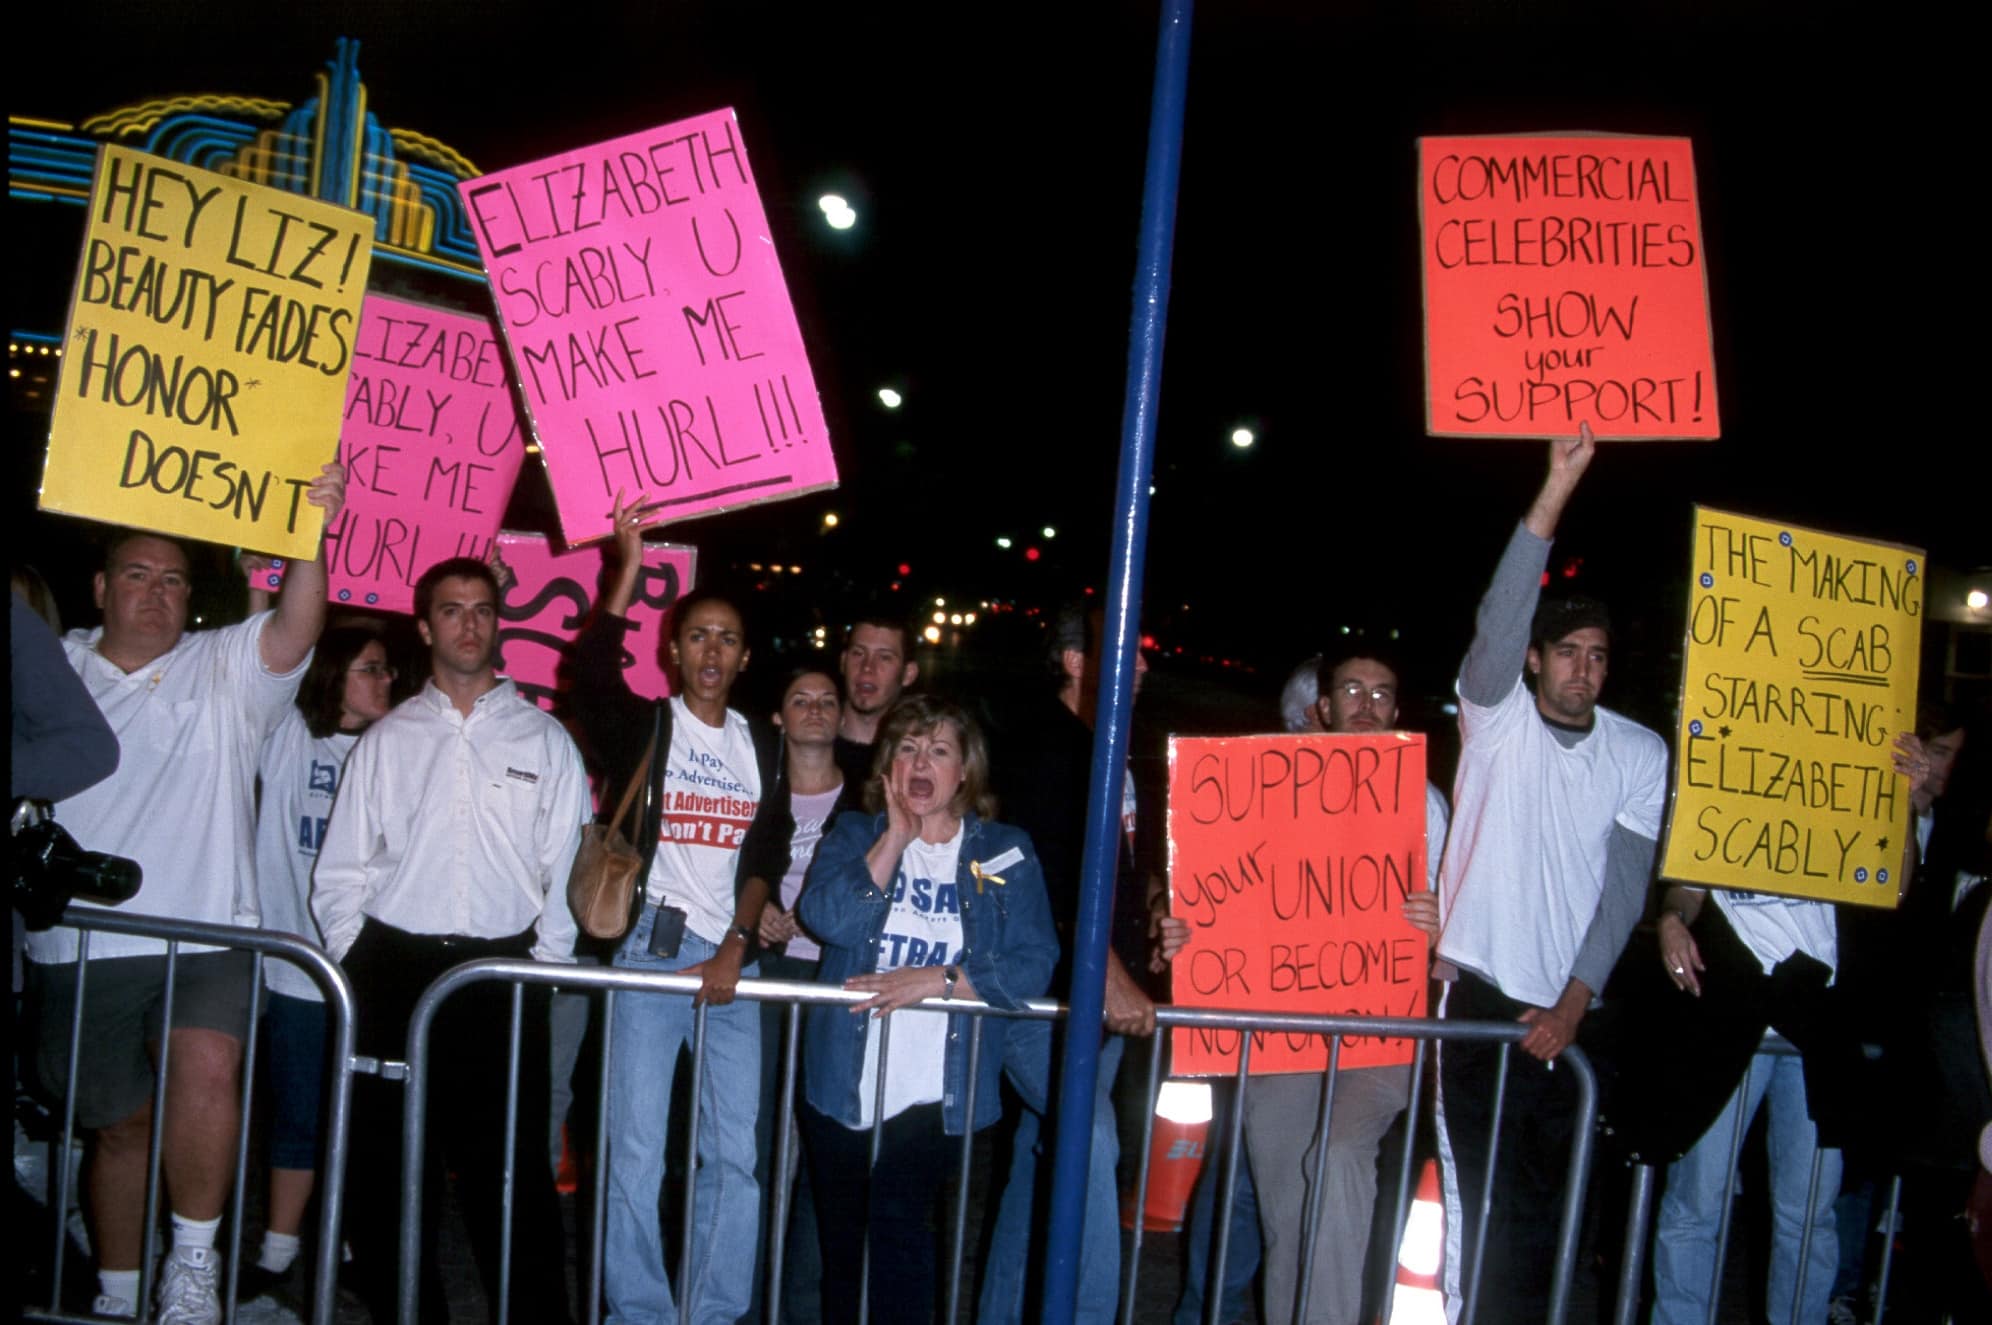 Elizabeth Hurley was met by protesters from the Screen Actors Guild at the premiere of Bedazzled at the Mann Village Theater in Hollywood